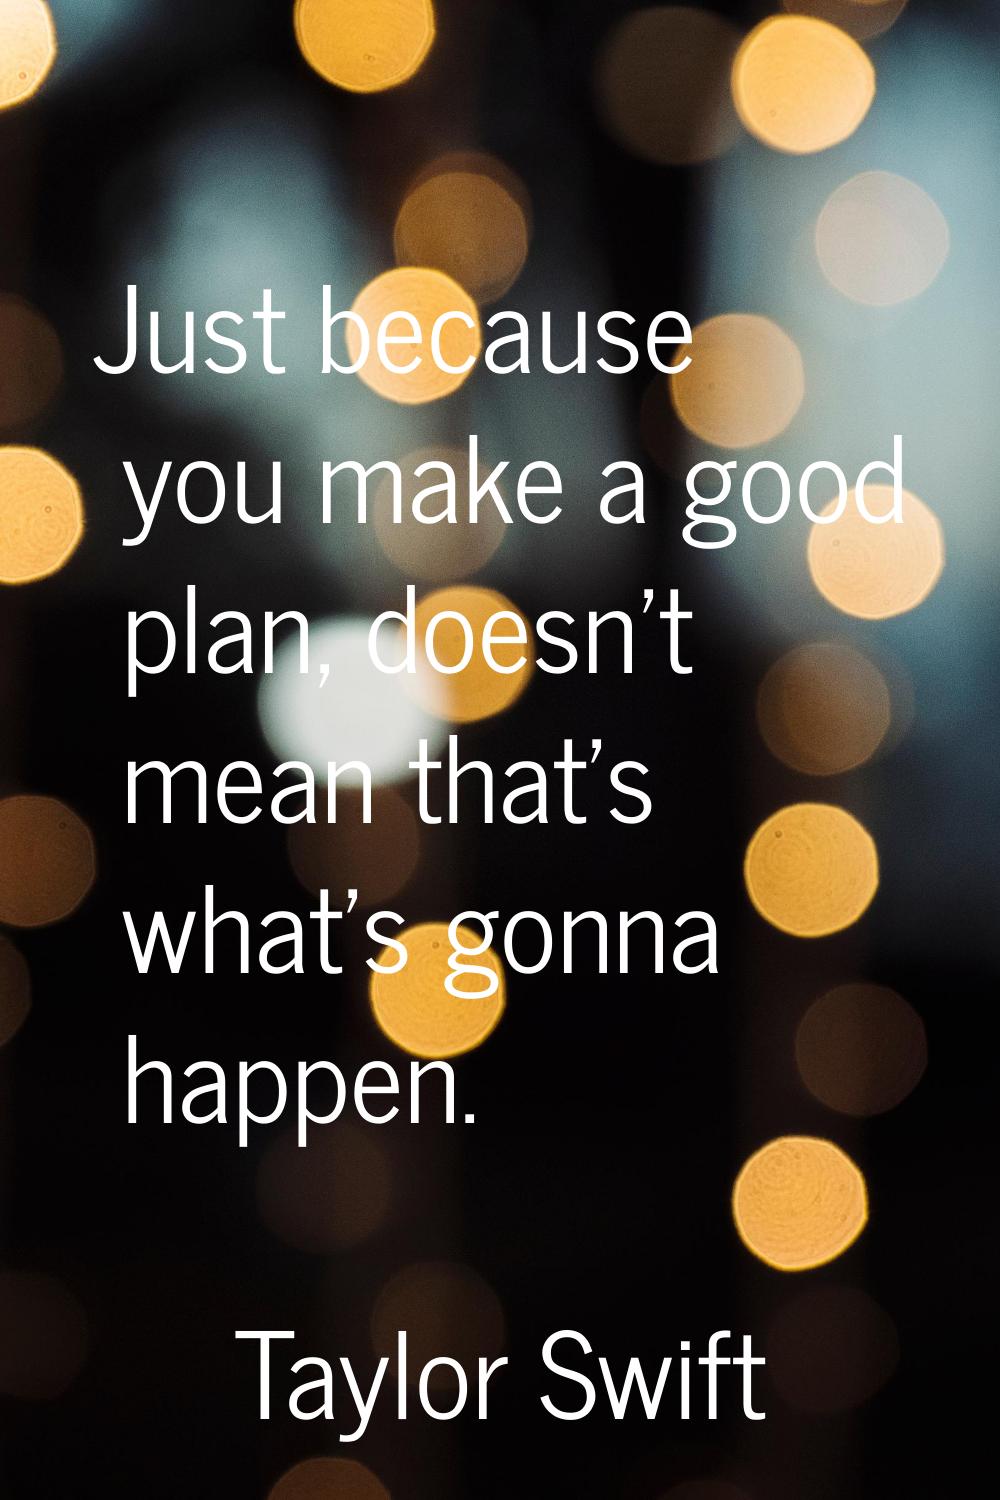 Just because you make a good plan, doesn't mean that's what's gonna happen.